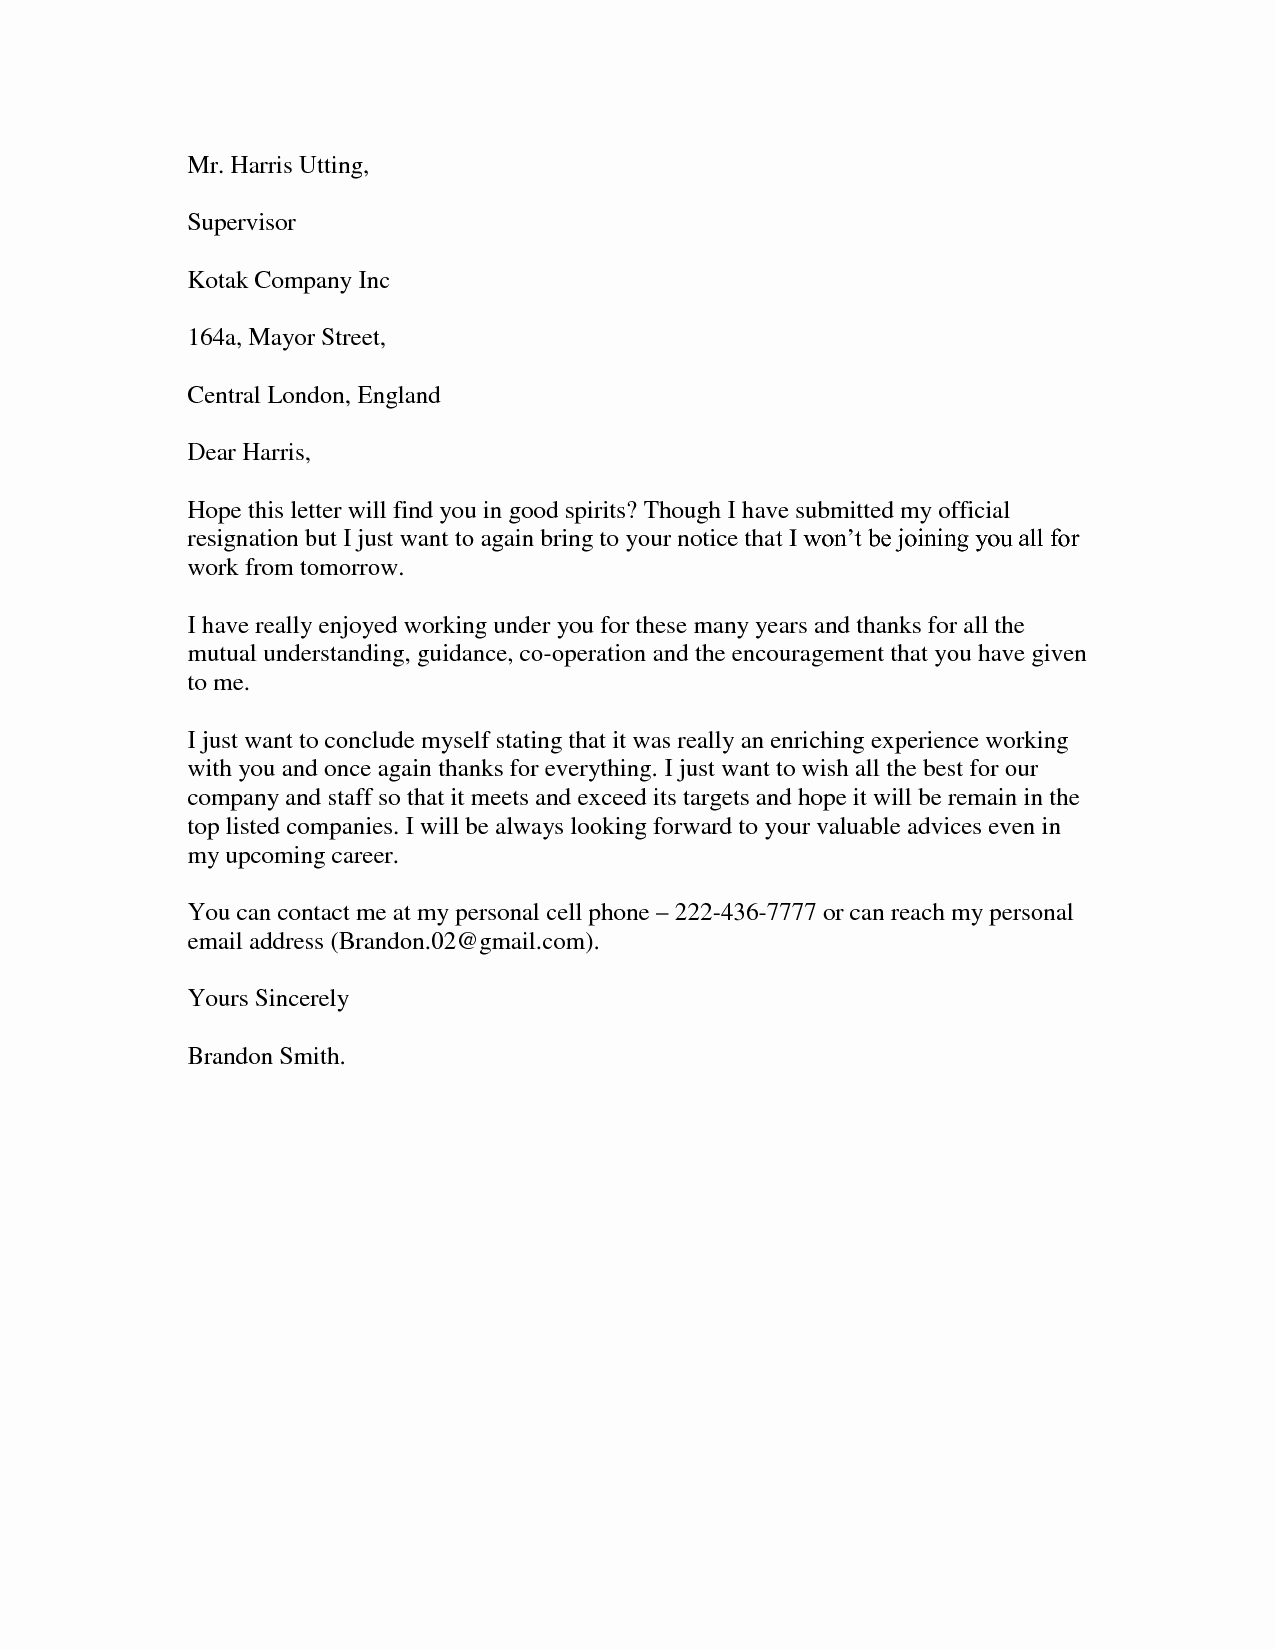 Business Letter format Template Word Inspirational How to Make A Business Letter In Microsoft Word How to